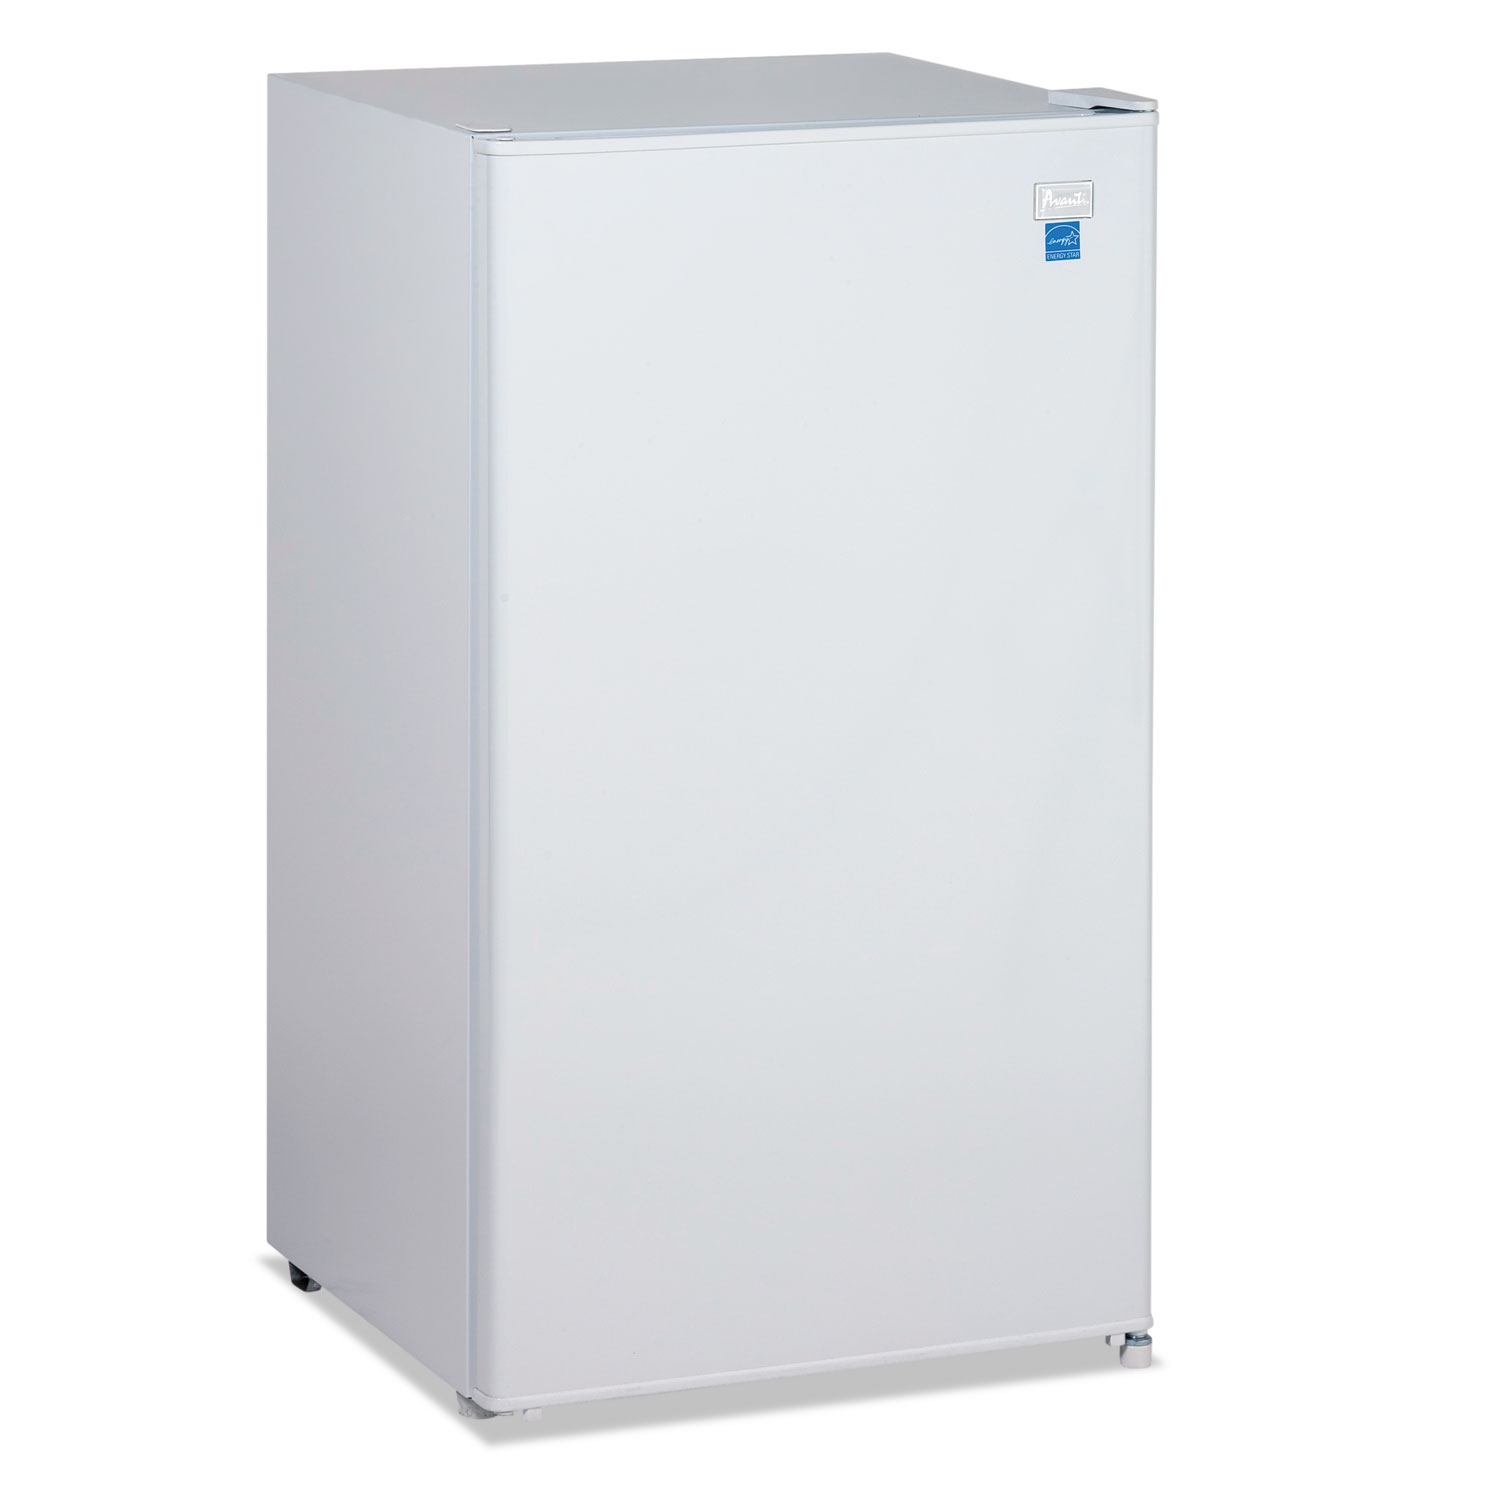 3.3 Cu.Ft Refrigerator with Chiller Compartment, White